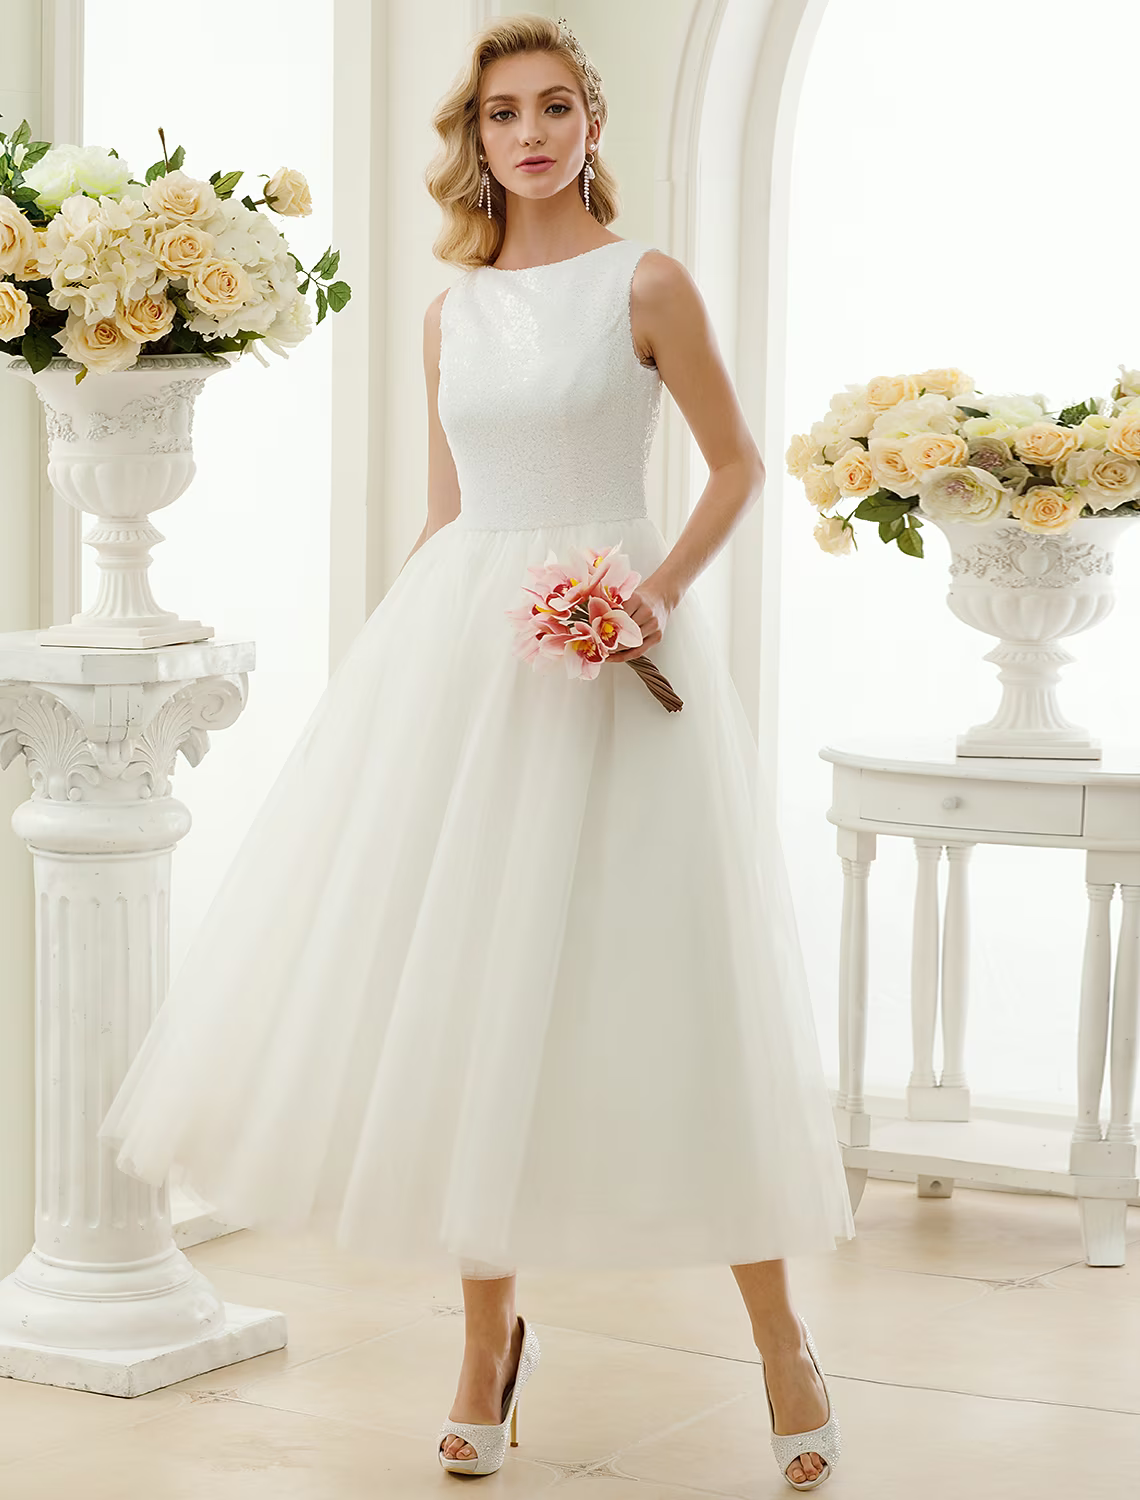 Little White Dresses Wedding Dresses Length A-Line Regular Straps Neck Tulle With Lace Sequin